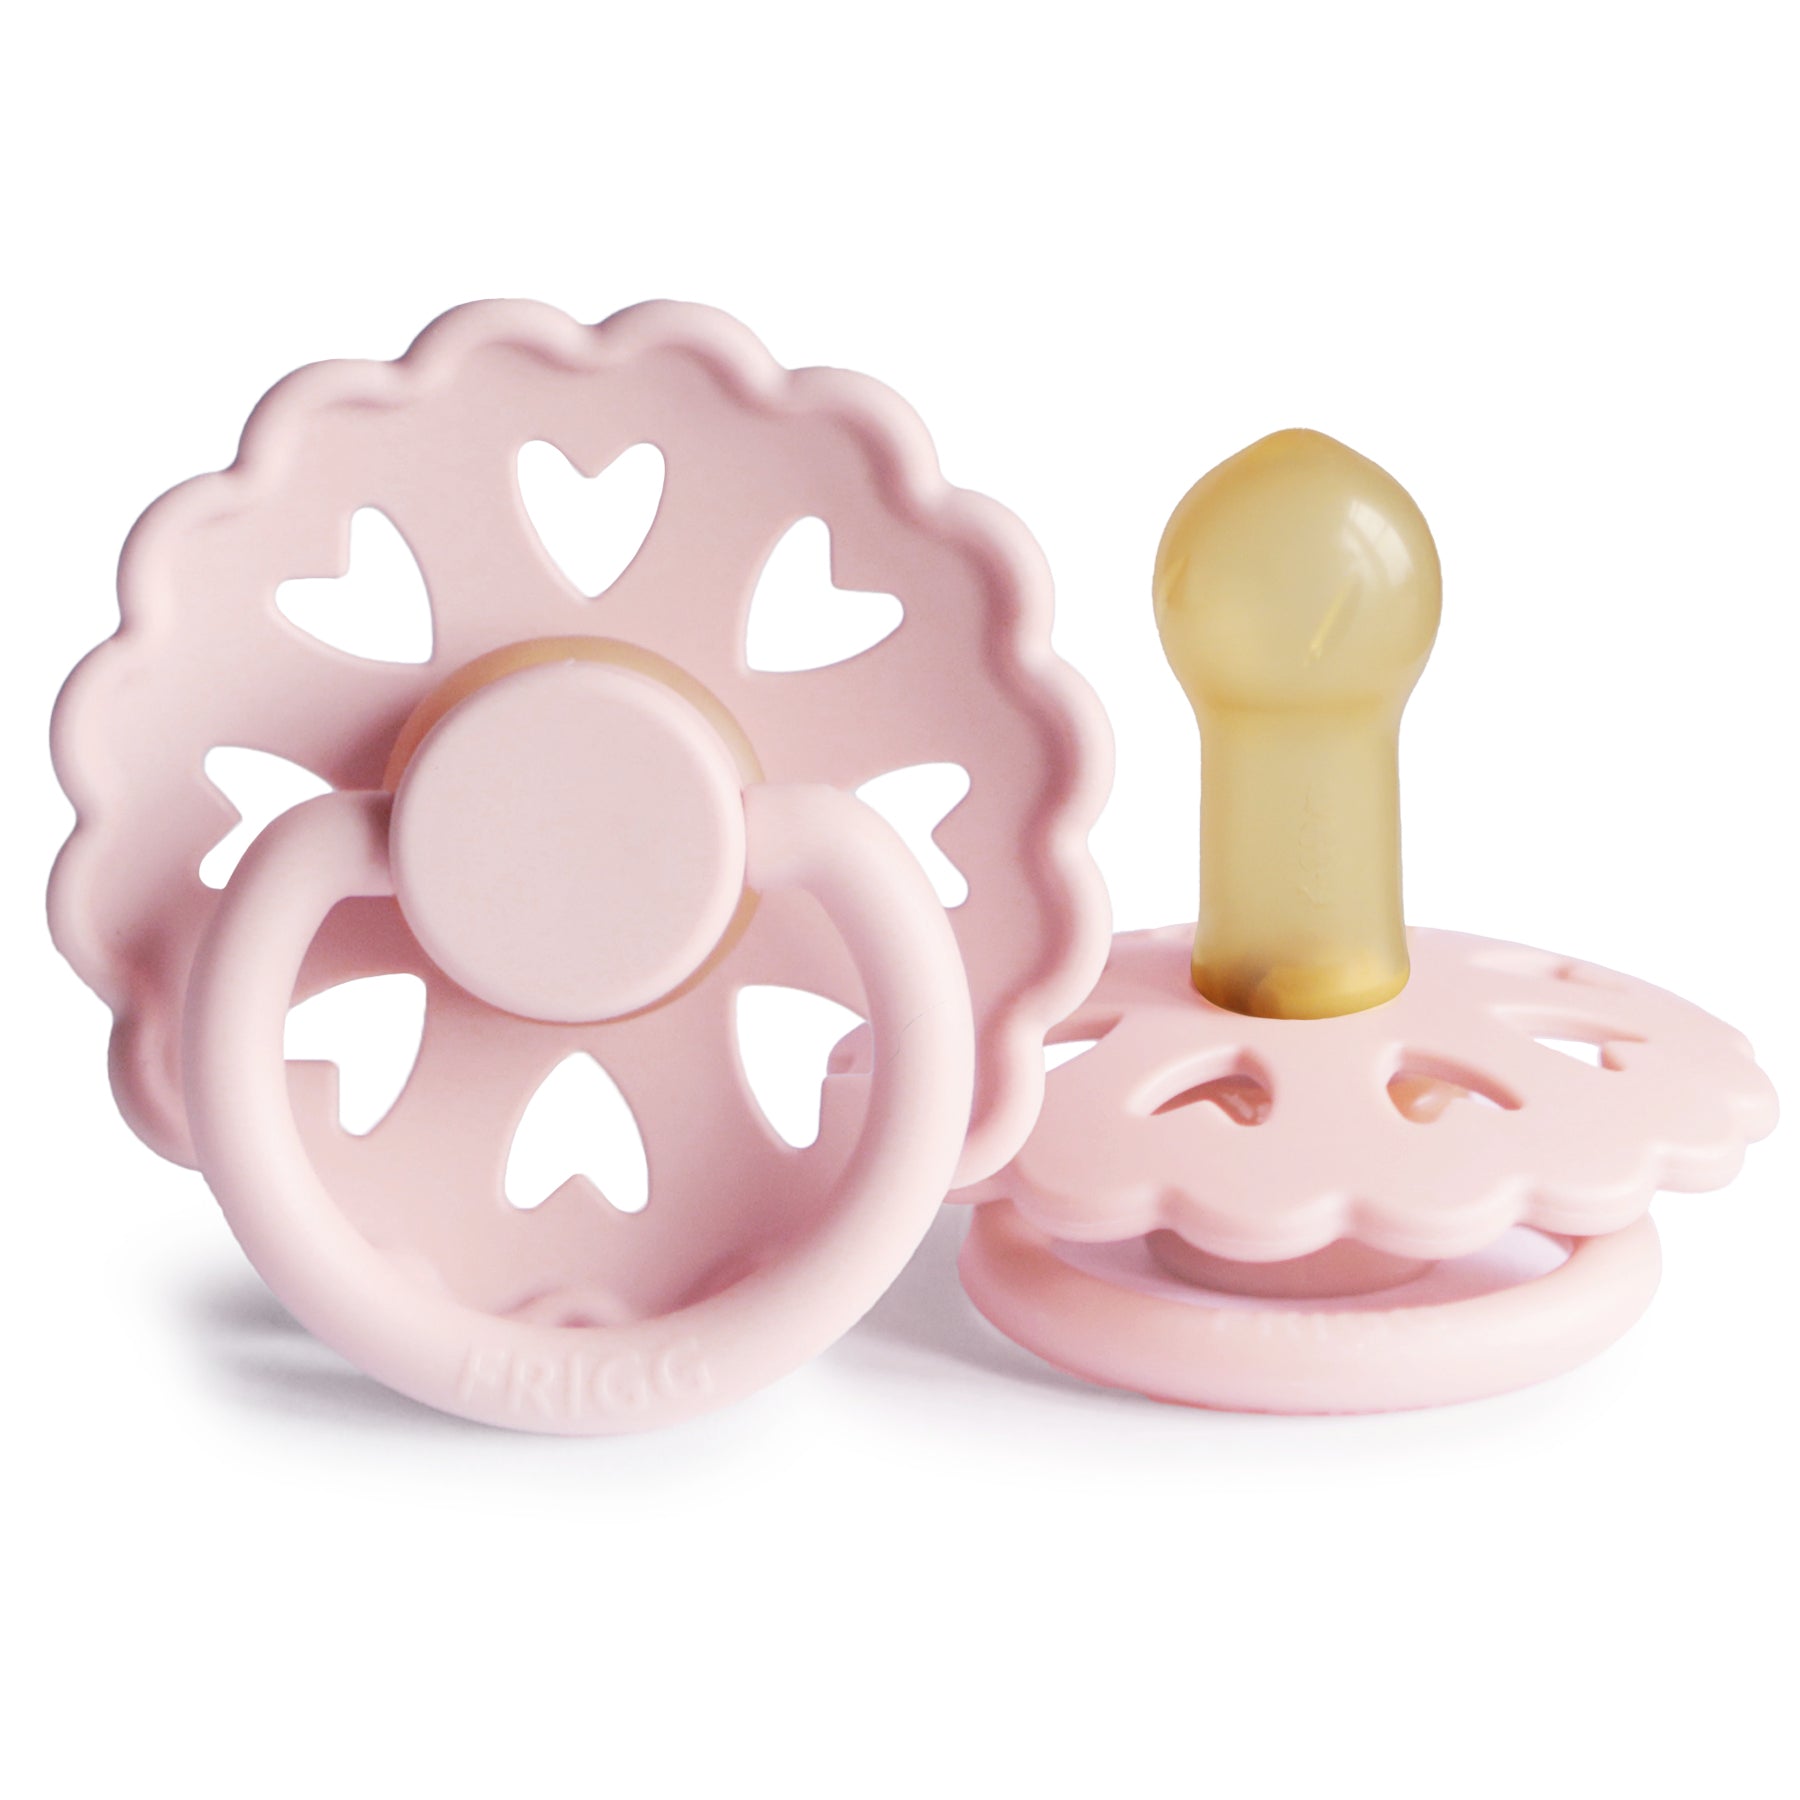 FRIGG Fairytale Latex Pacifier Dummy – The Snow Queen